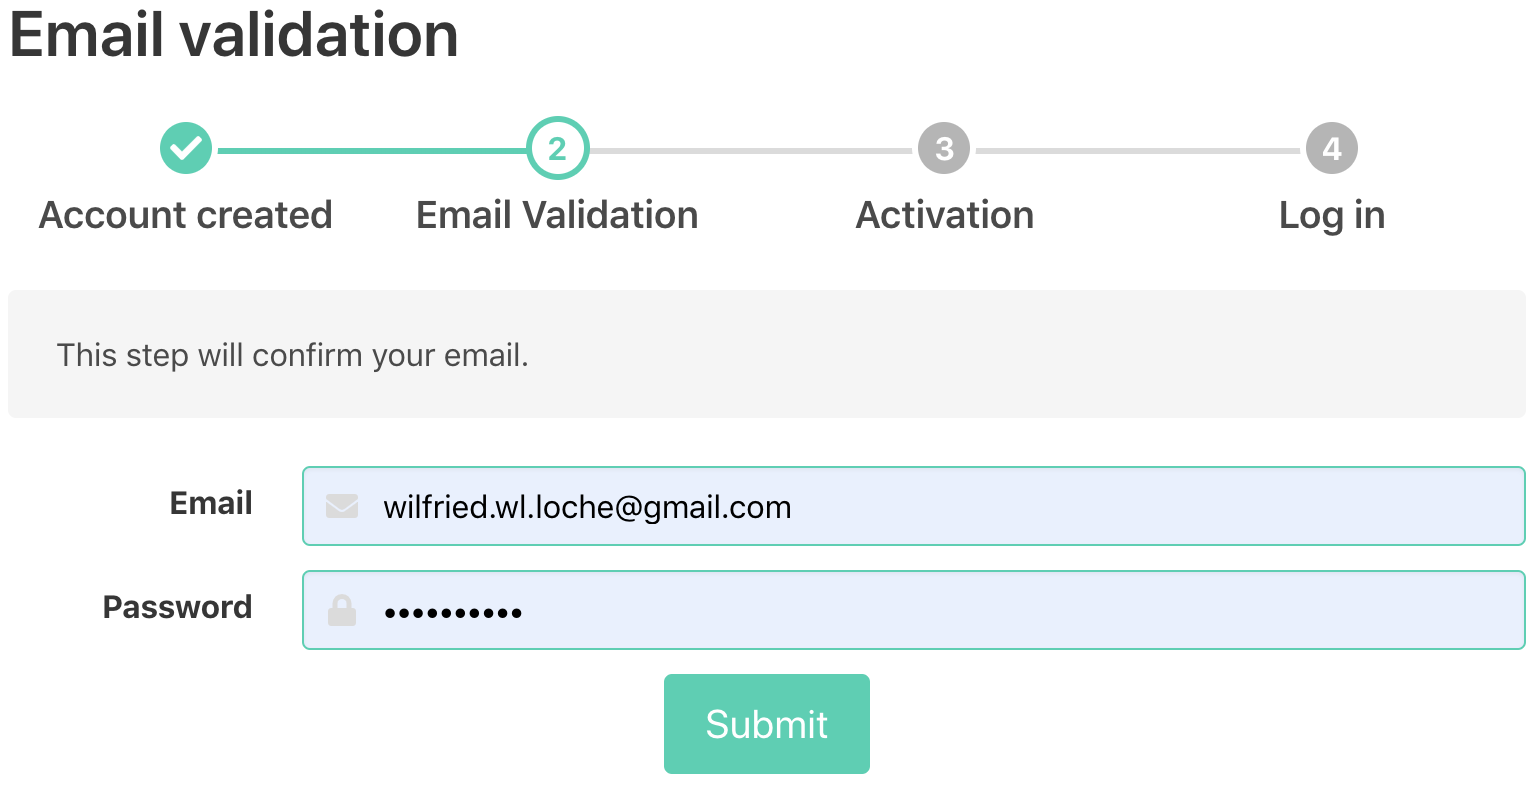 Sign up: Email validation submit